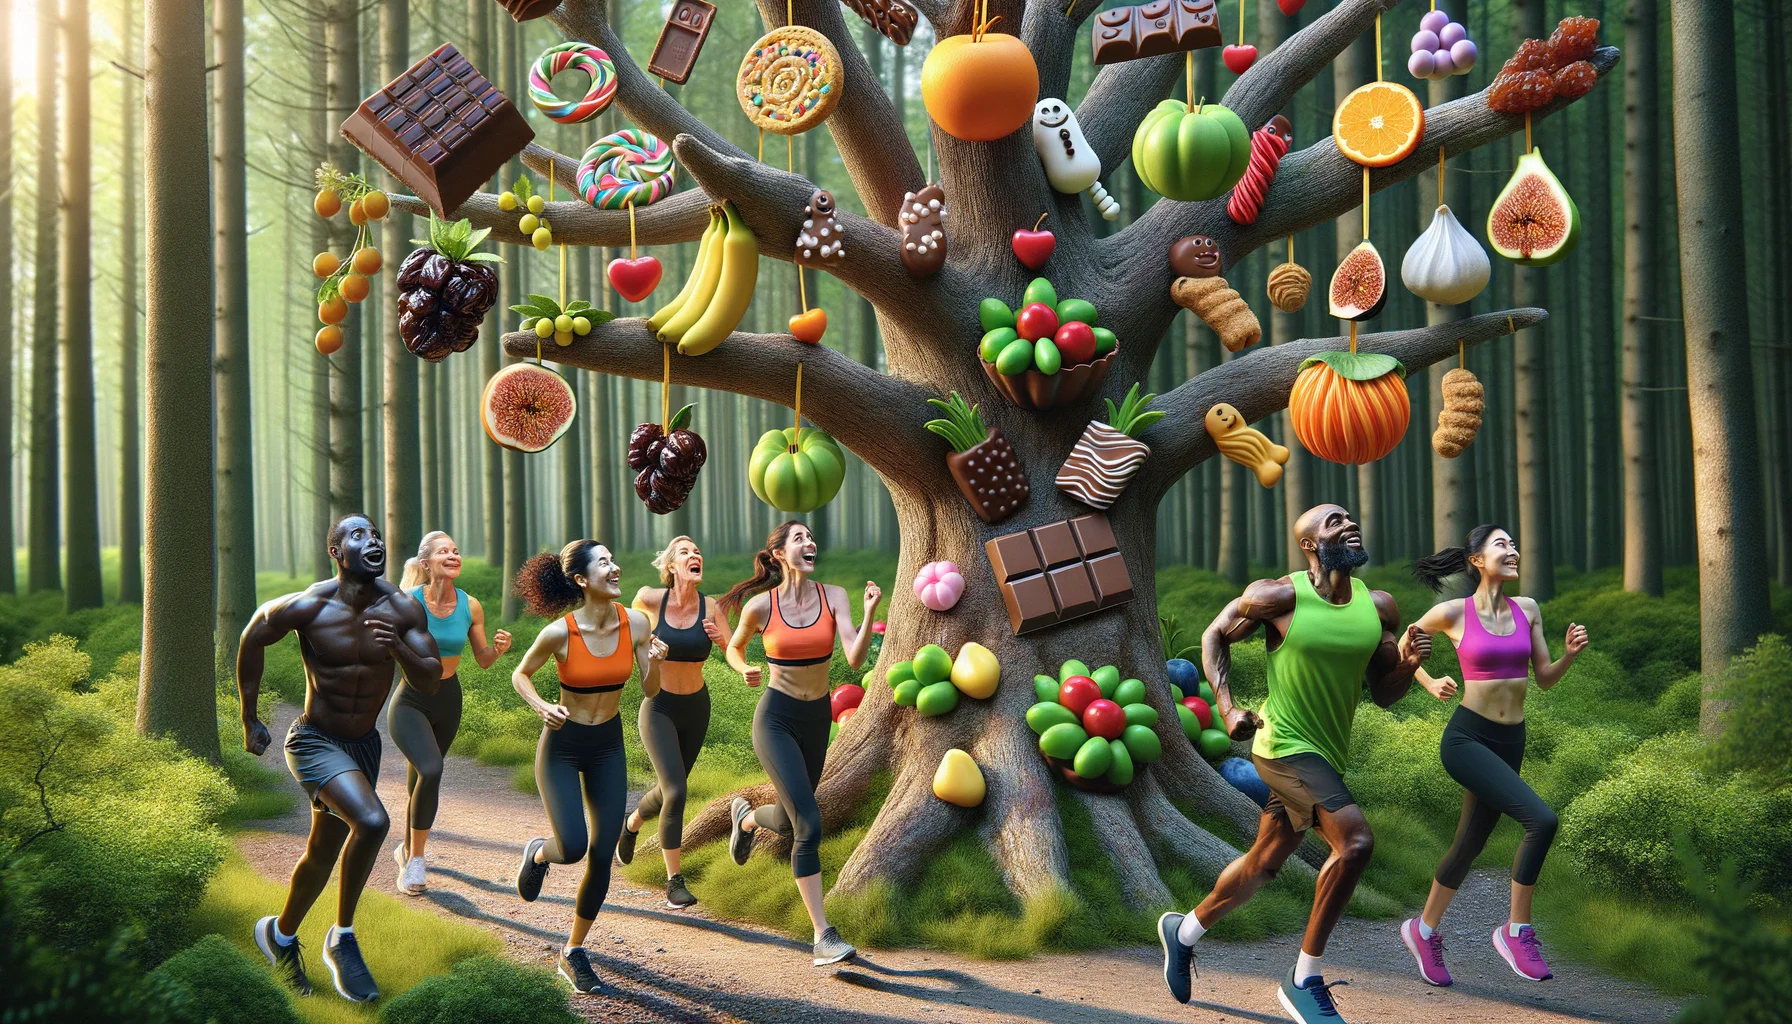 Create a humorous and realistic scenario showcasing 'Energy-Boosting Natural Sweets'. Imagine a forest setting early in the morning. A group of joggers of different genders and descents, such as a black woman, a Middle-Eastern man, and a South Asian woman, pass by a mysteriously alluring tree. This tree has branches laden with glistening fruits in the form of different natural sweets - figs shaped like cookies, dates resembling chocolate bars, and blueberries clusters formed like gummy bears. The joggers, wearing vibrant fitness outfits, express their surprise and delight as they reach out to grab the sweet treats, with their faces filled with tiredness turning into playful enthusiasm.